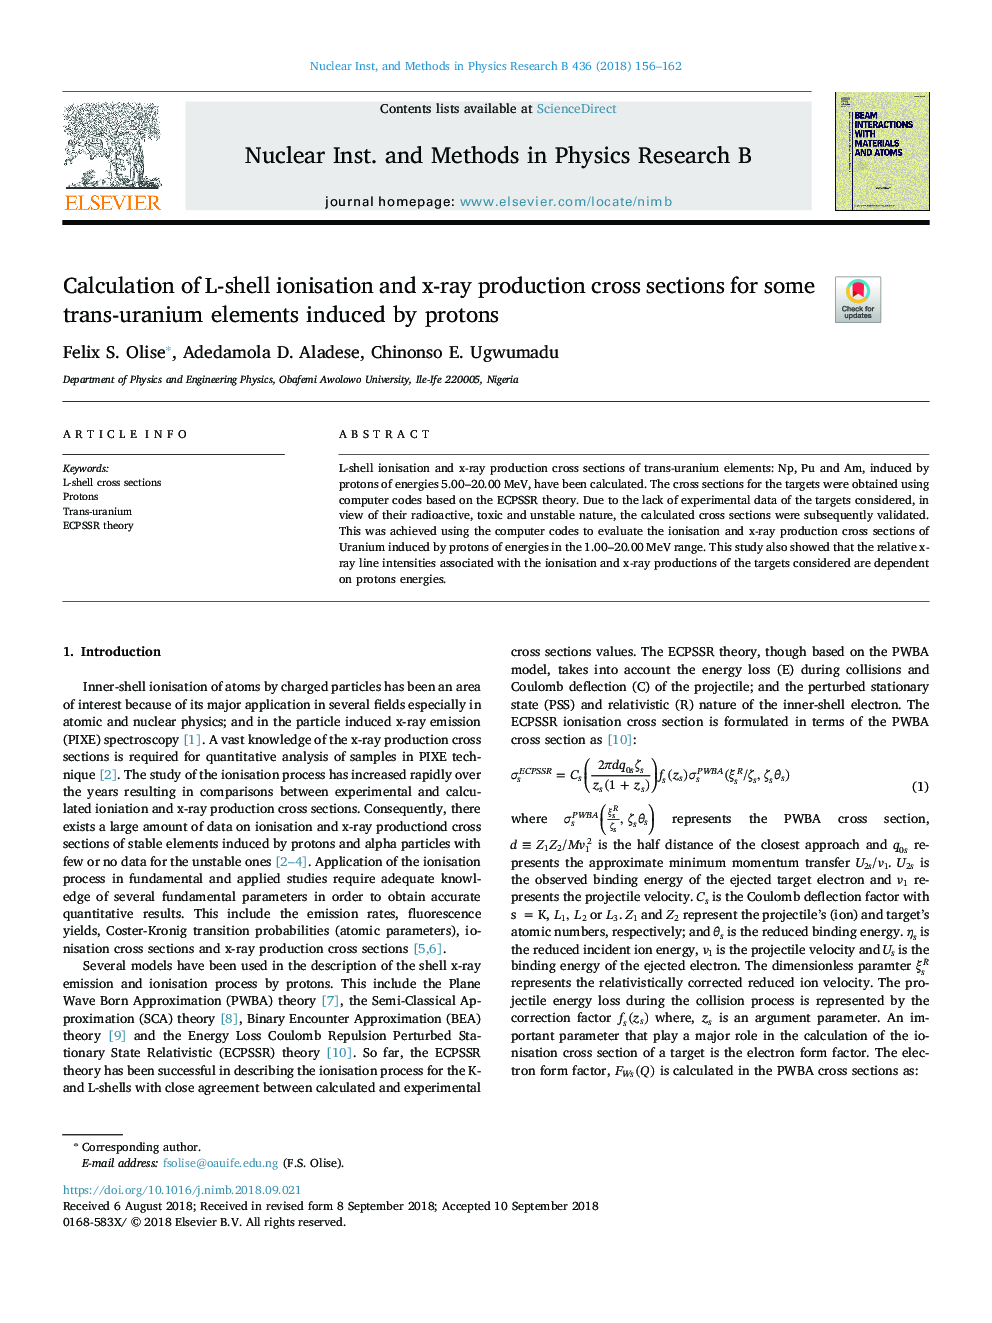 Calculation of L-shell ionisation and x-ray production cross sections for some trans-uranium elements induced by protons